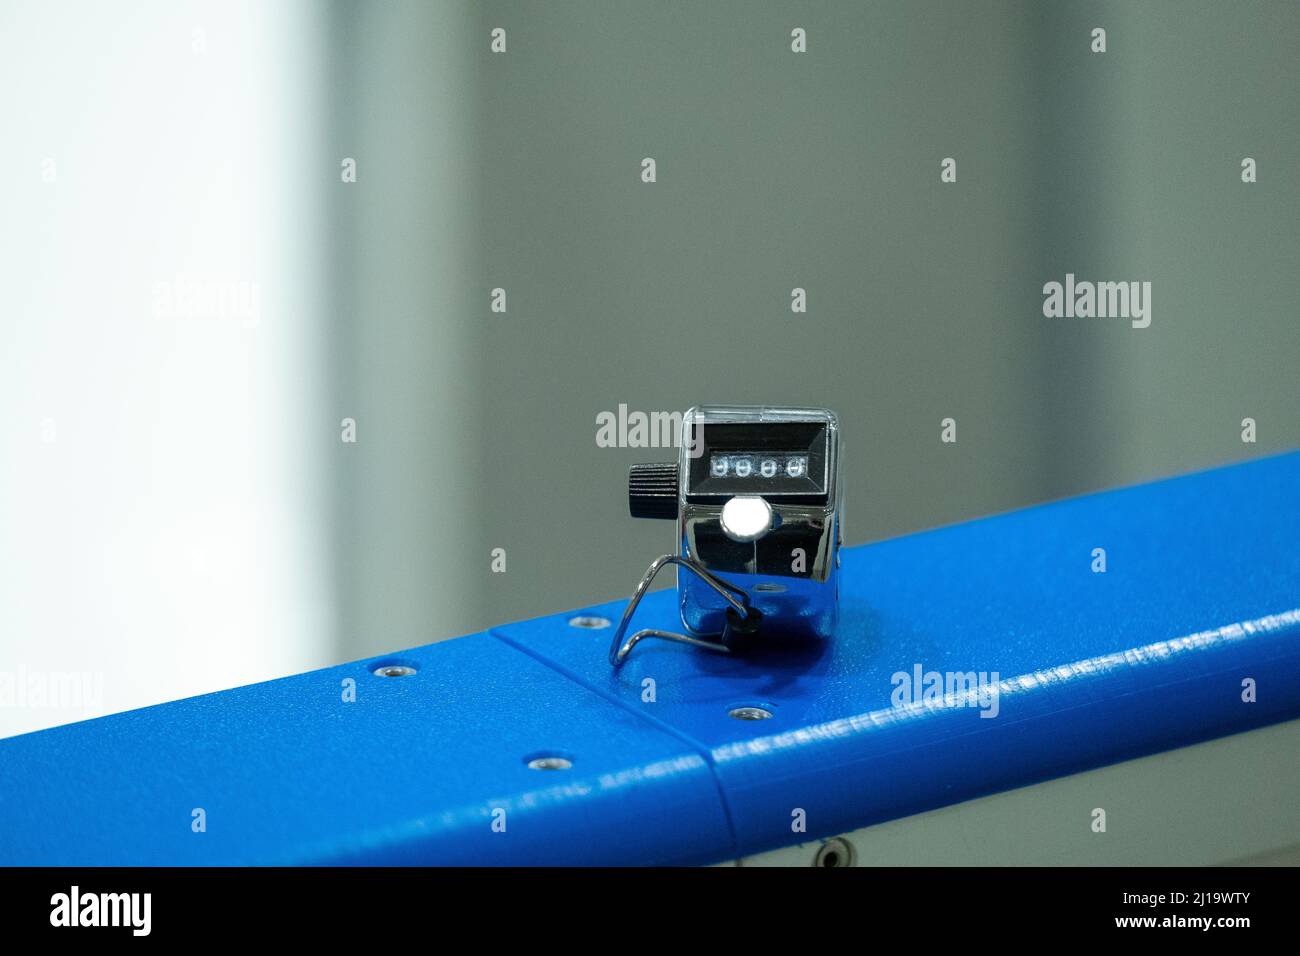 Closeup of a metallic click counter used by ice hockey officials to count shots on goal. Sports statistics. Stock Photo